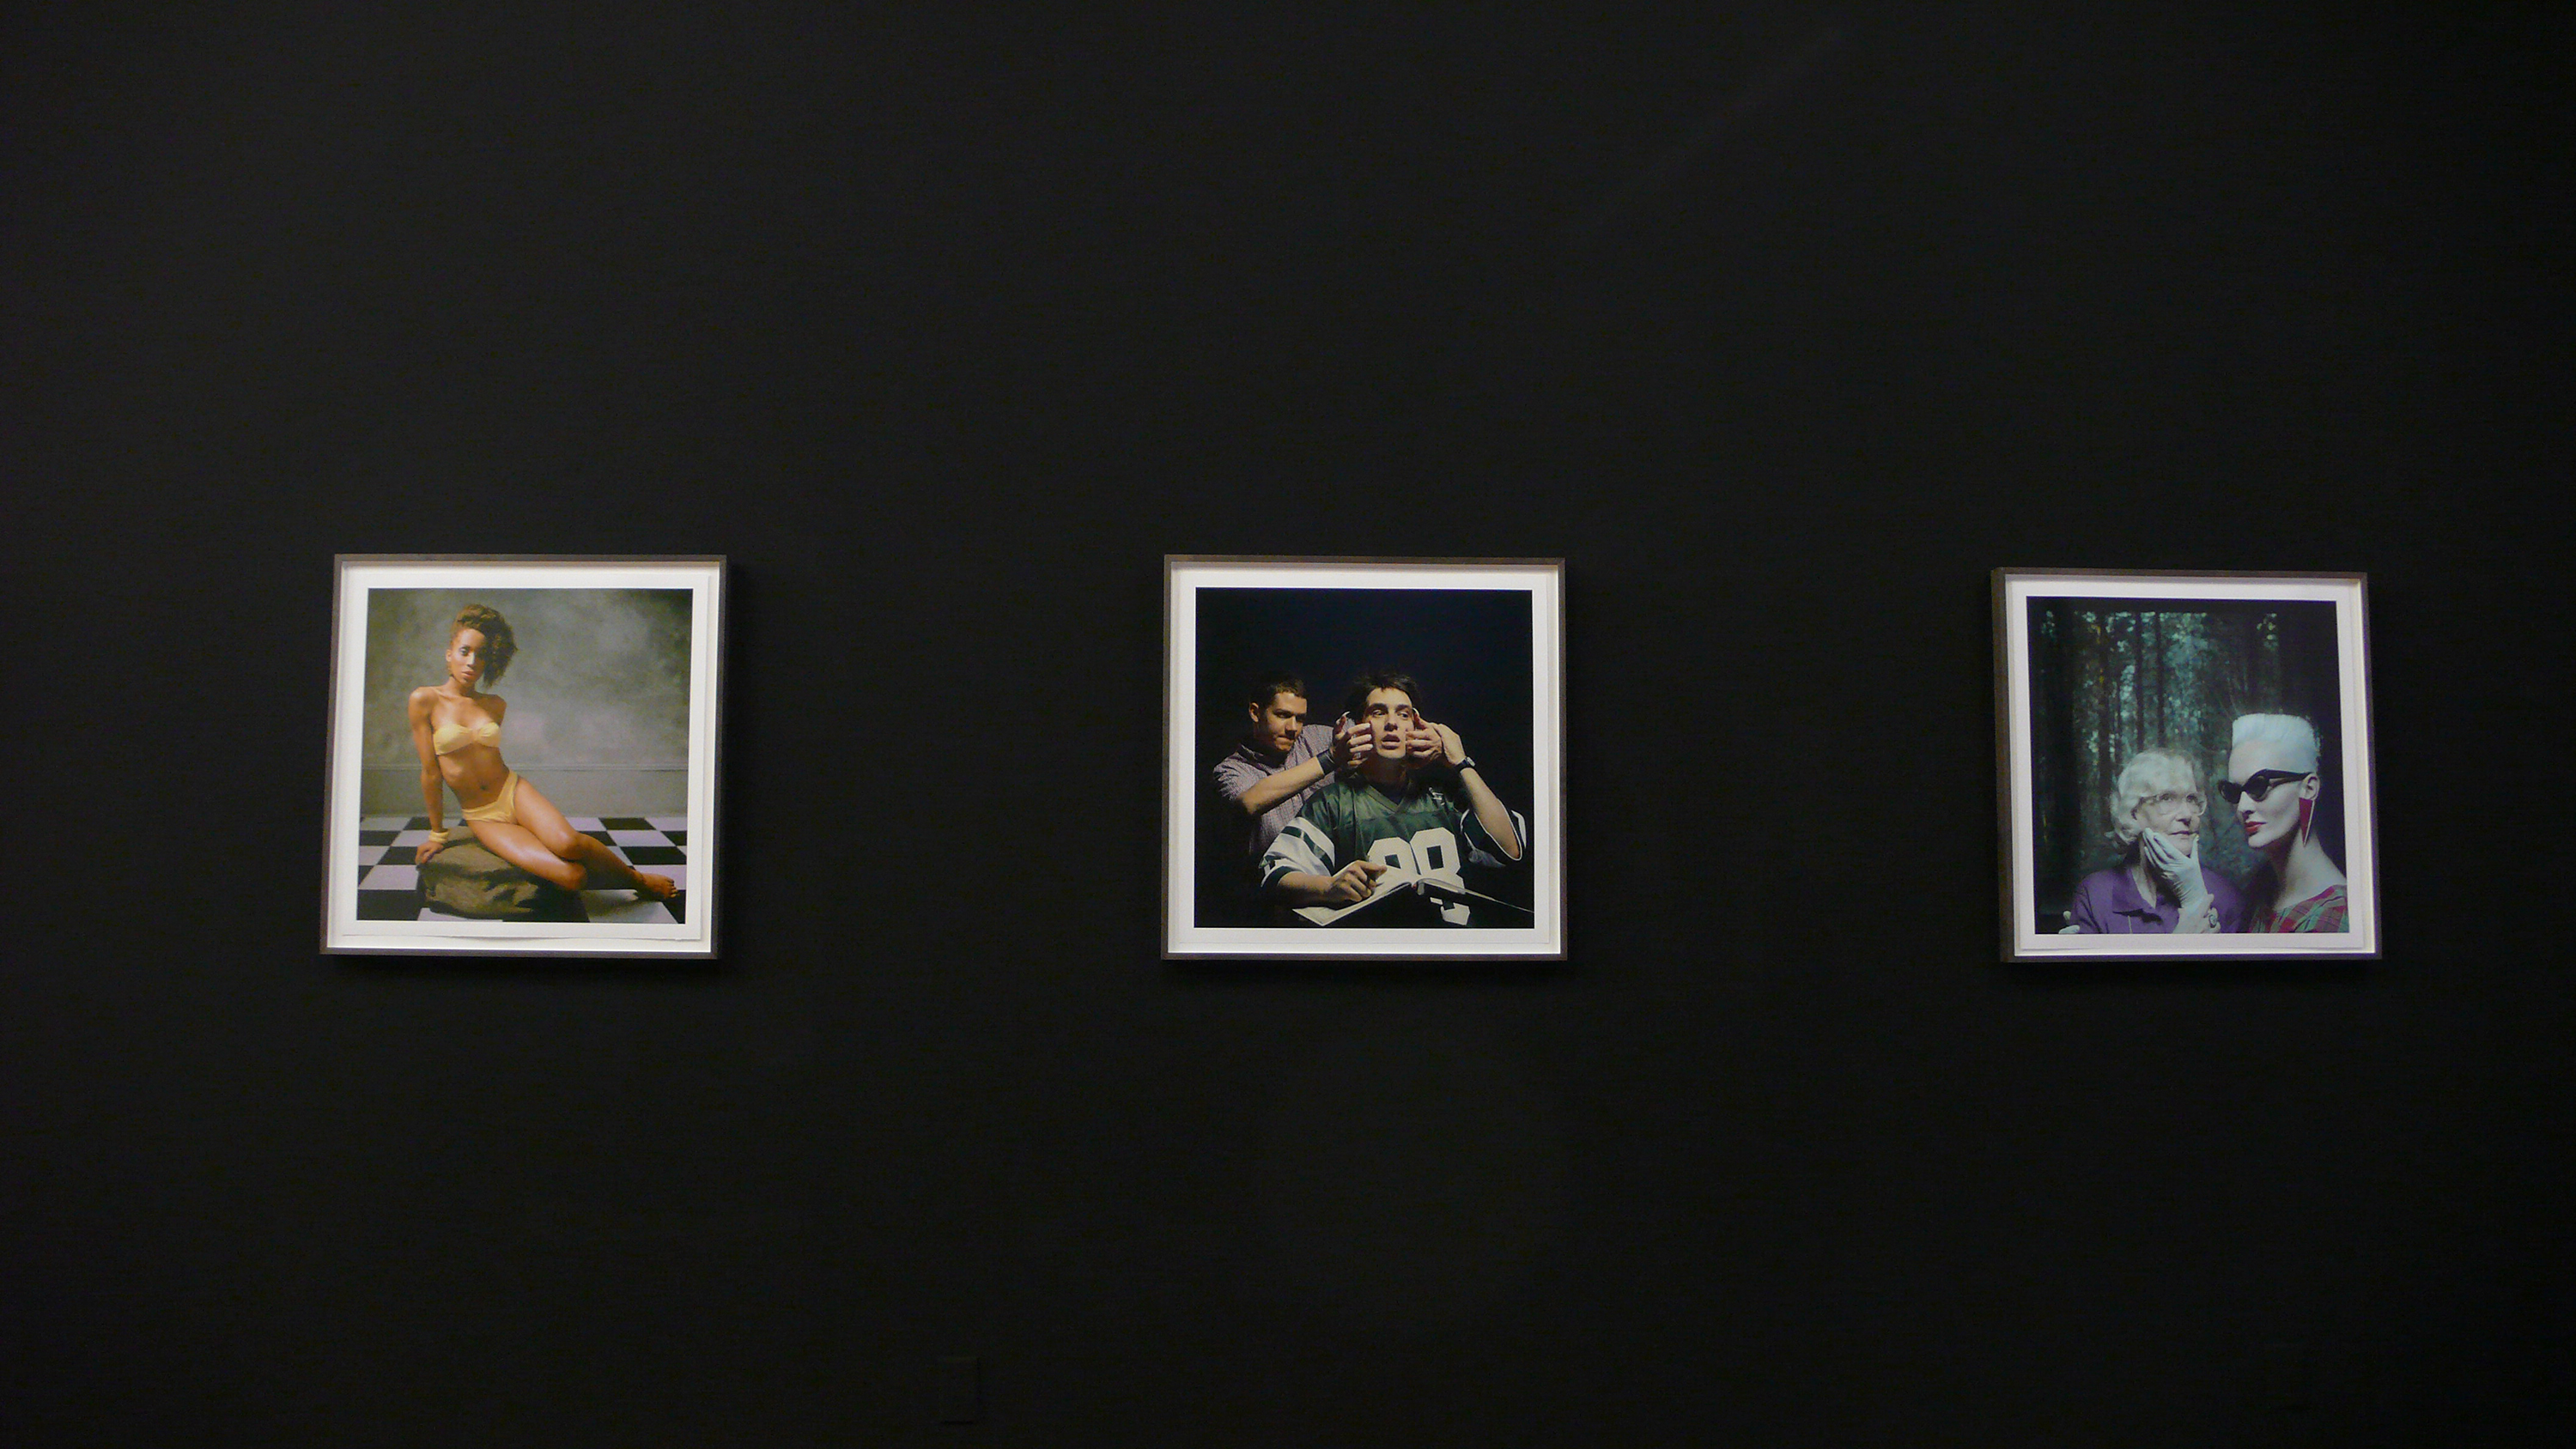 Josef Astor, *Displaced Persons*. Installation view